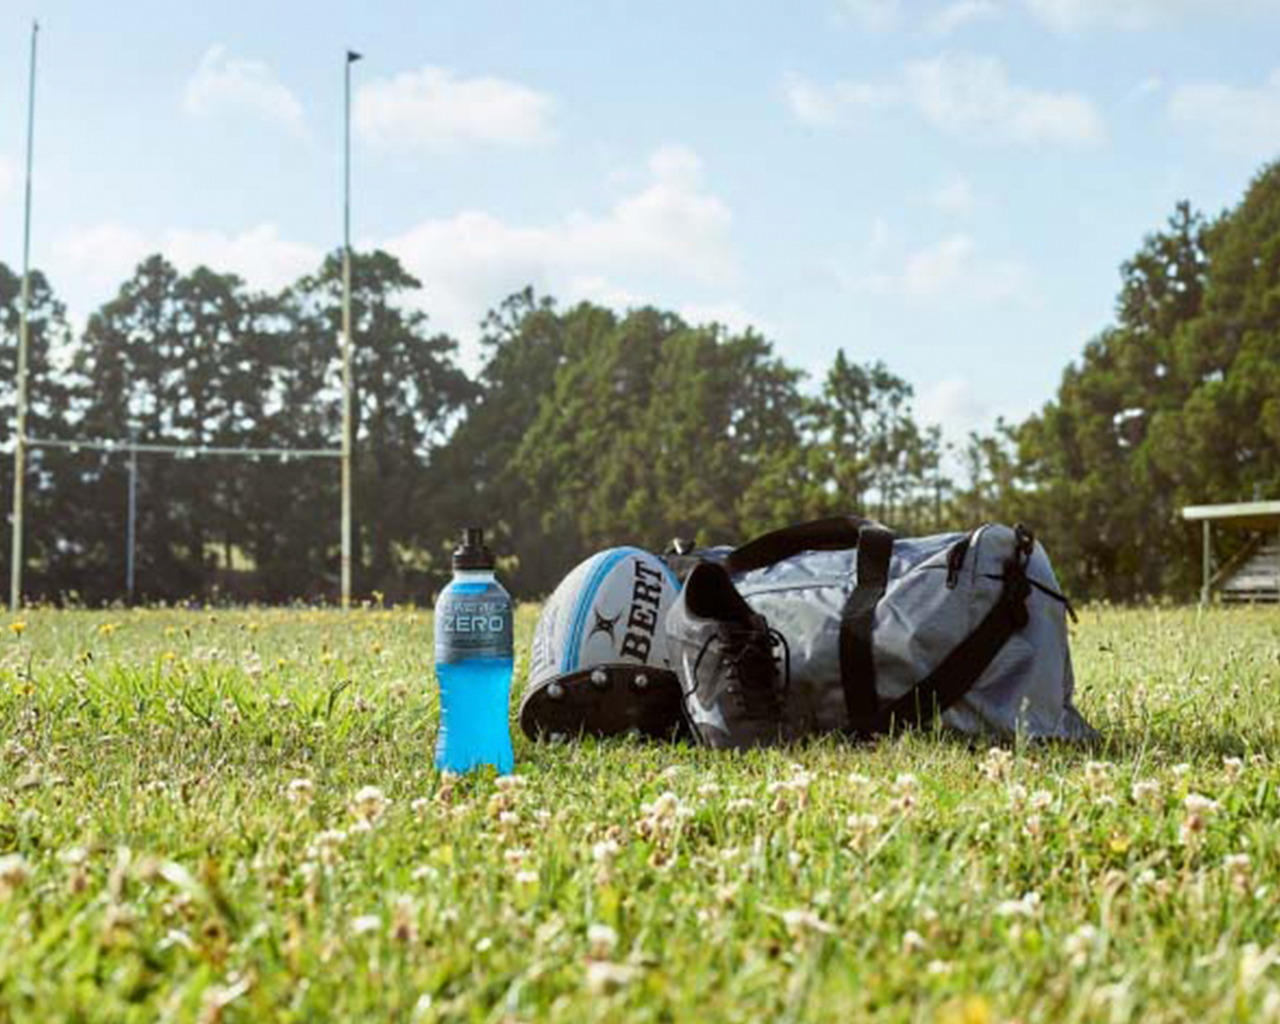 A bottle of Powerade on the ground of an empty rugby field